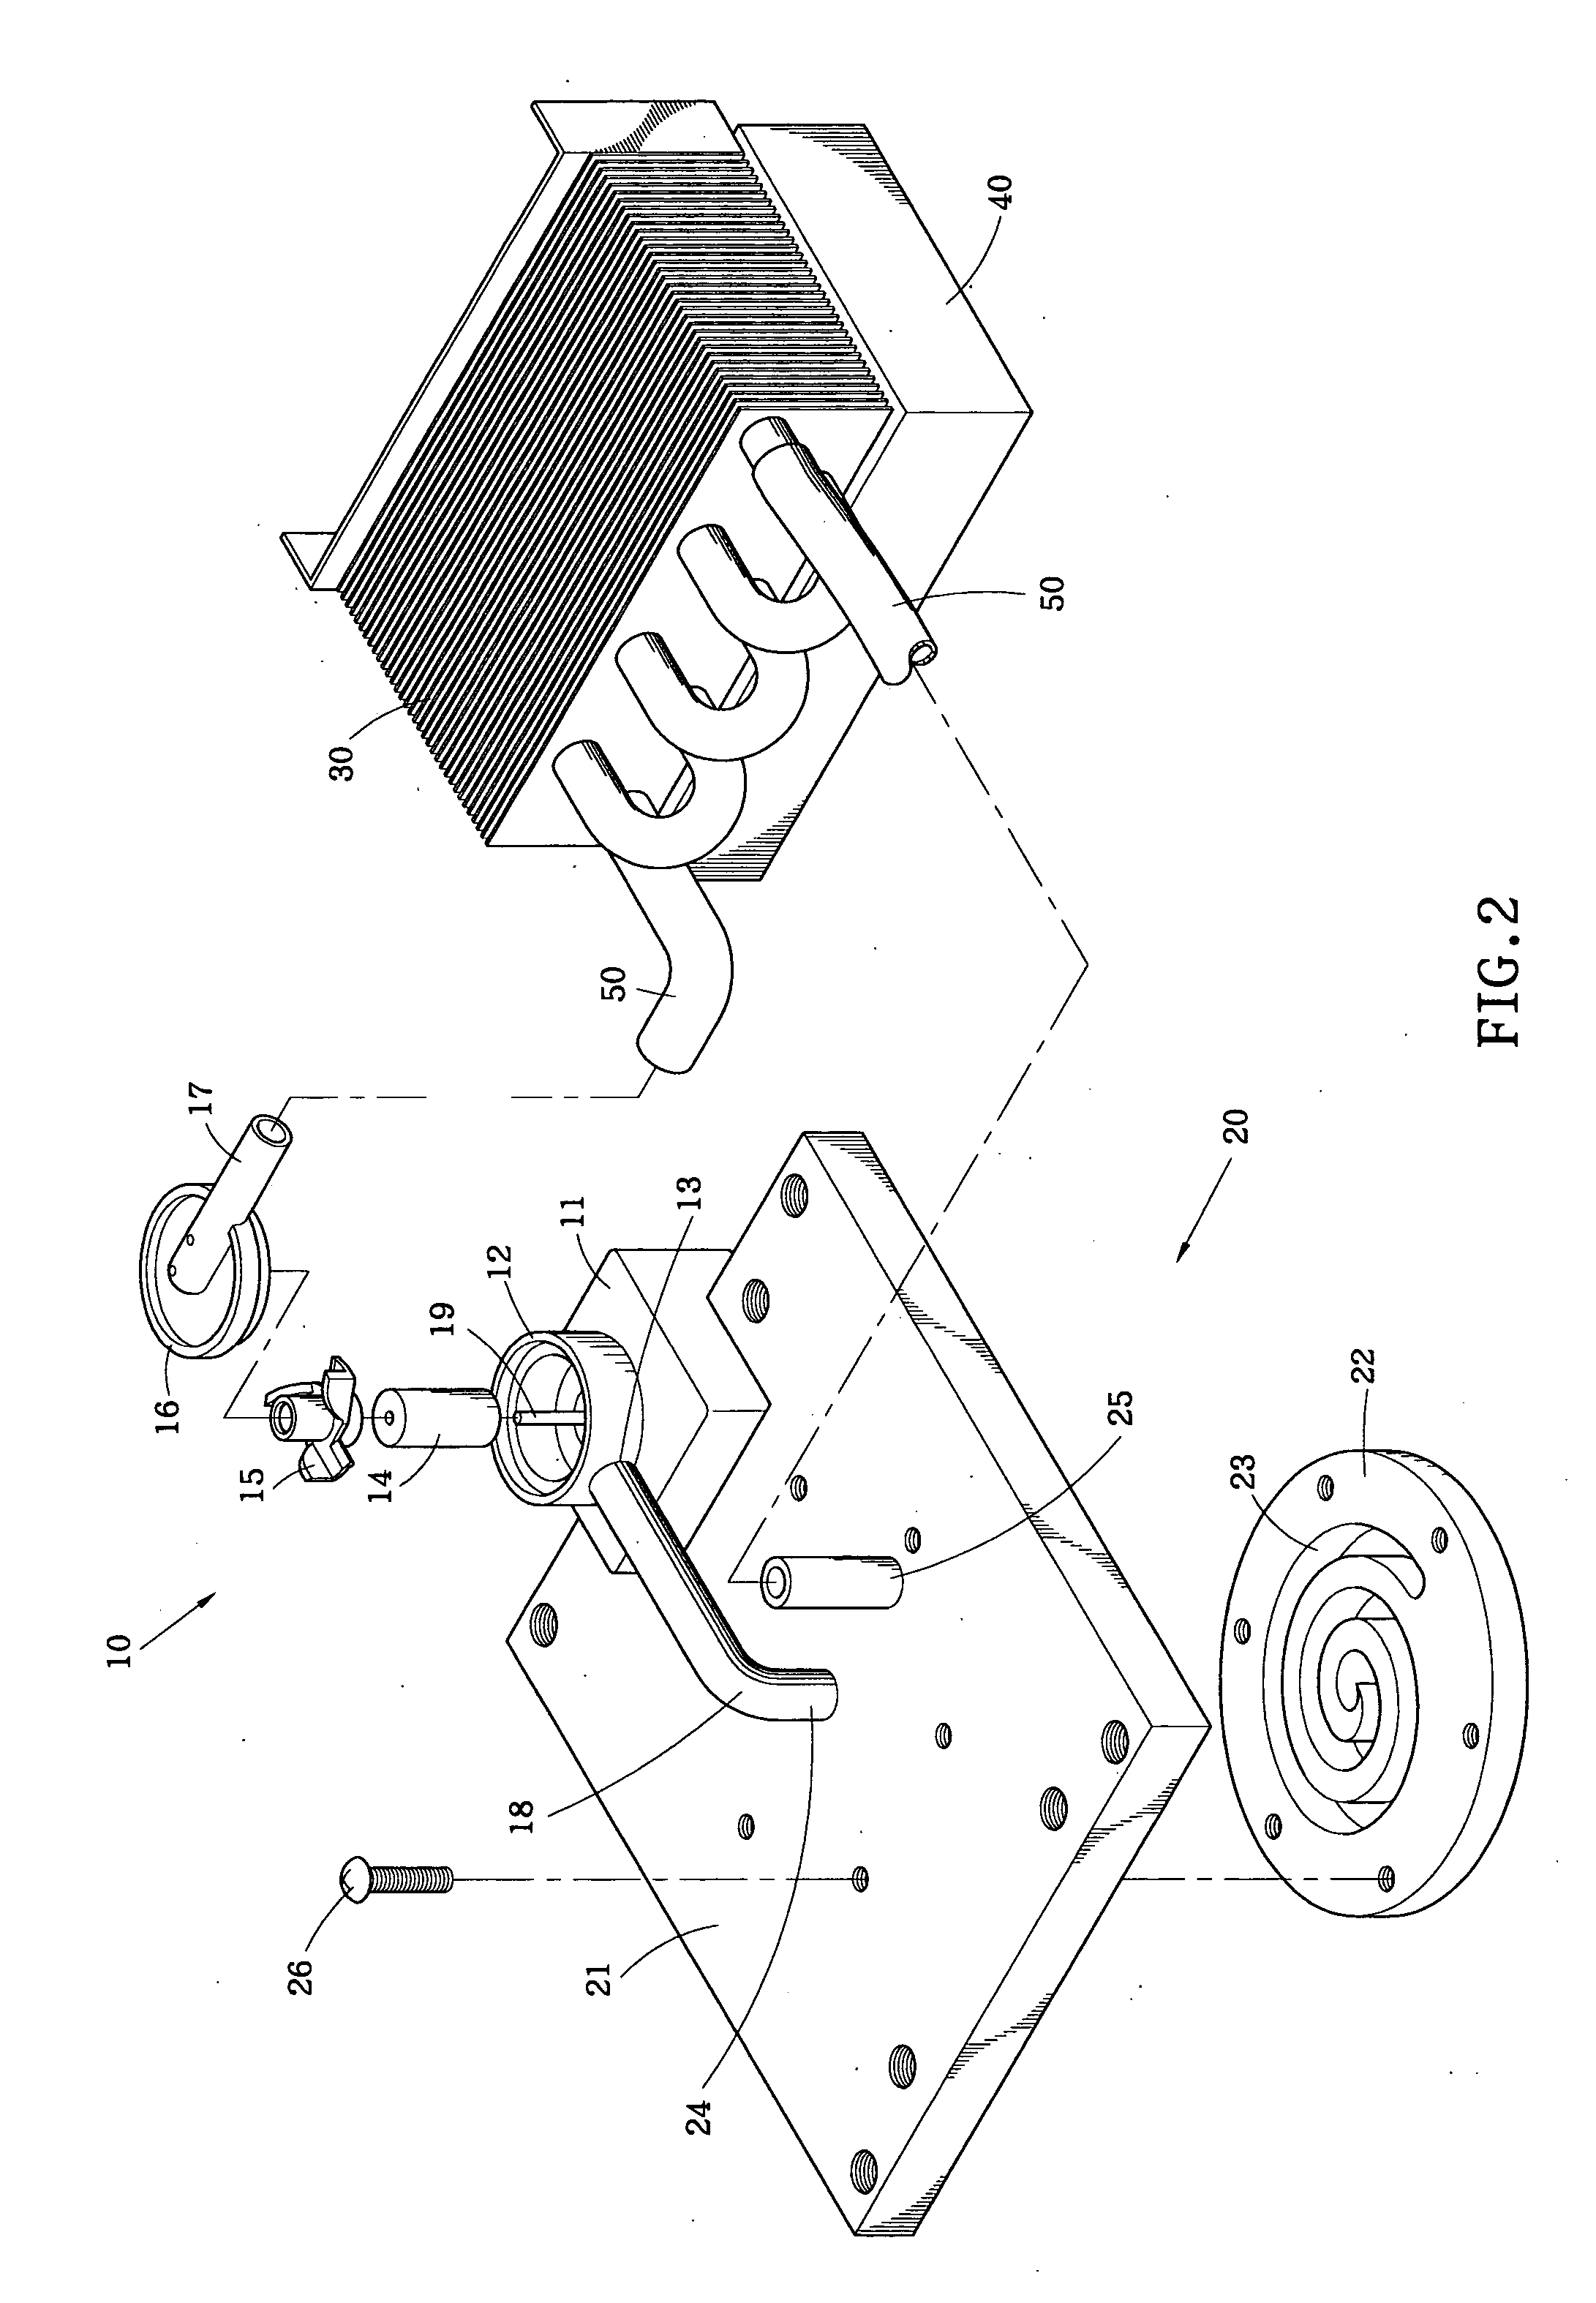 Coolant tray of liquid based cooling device